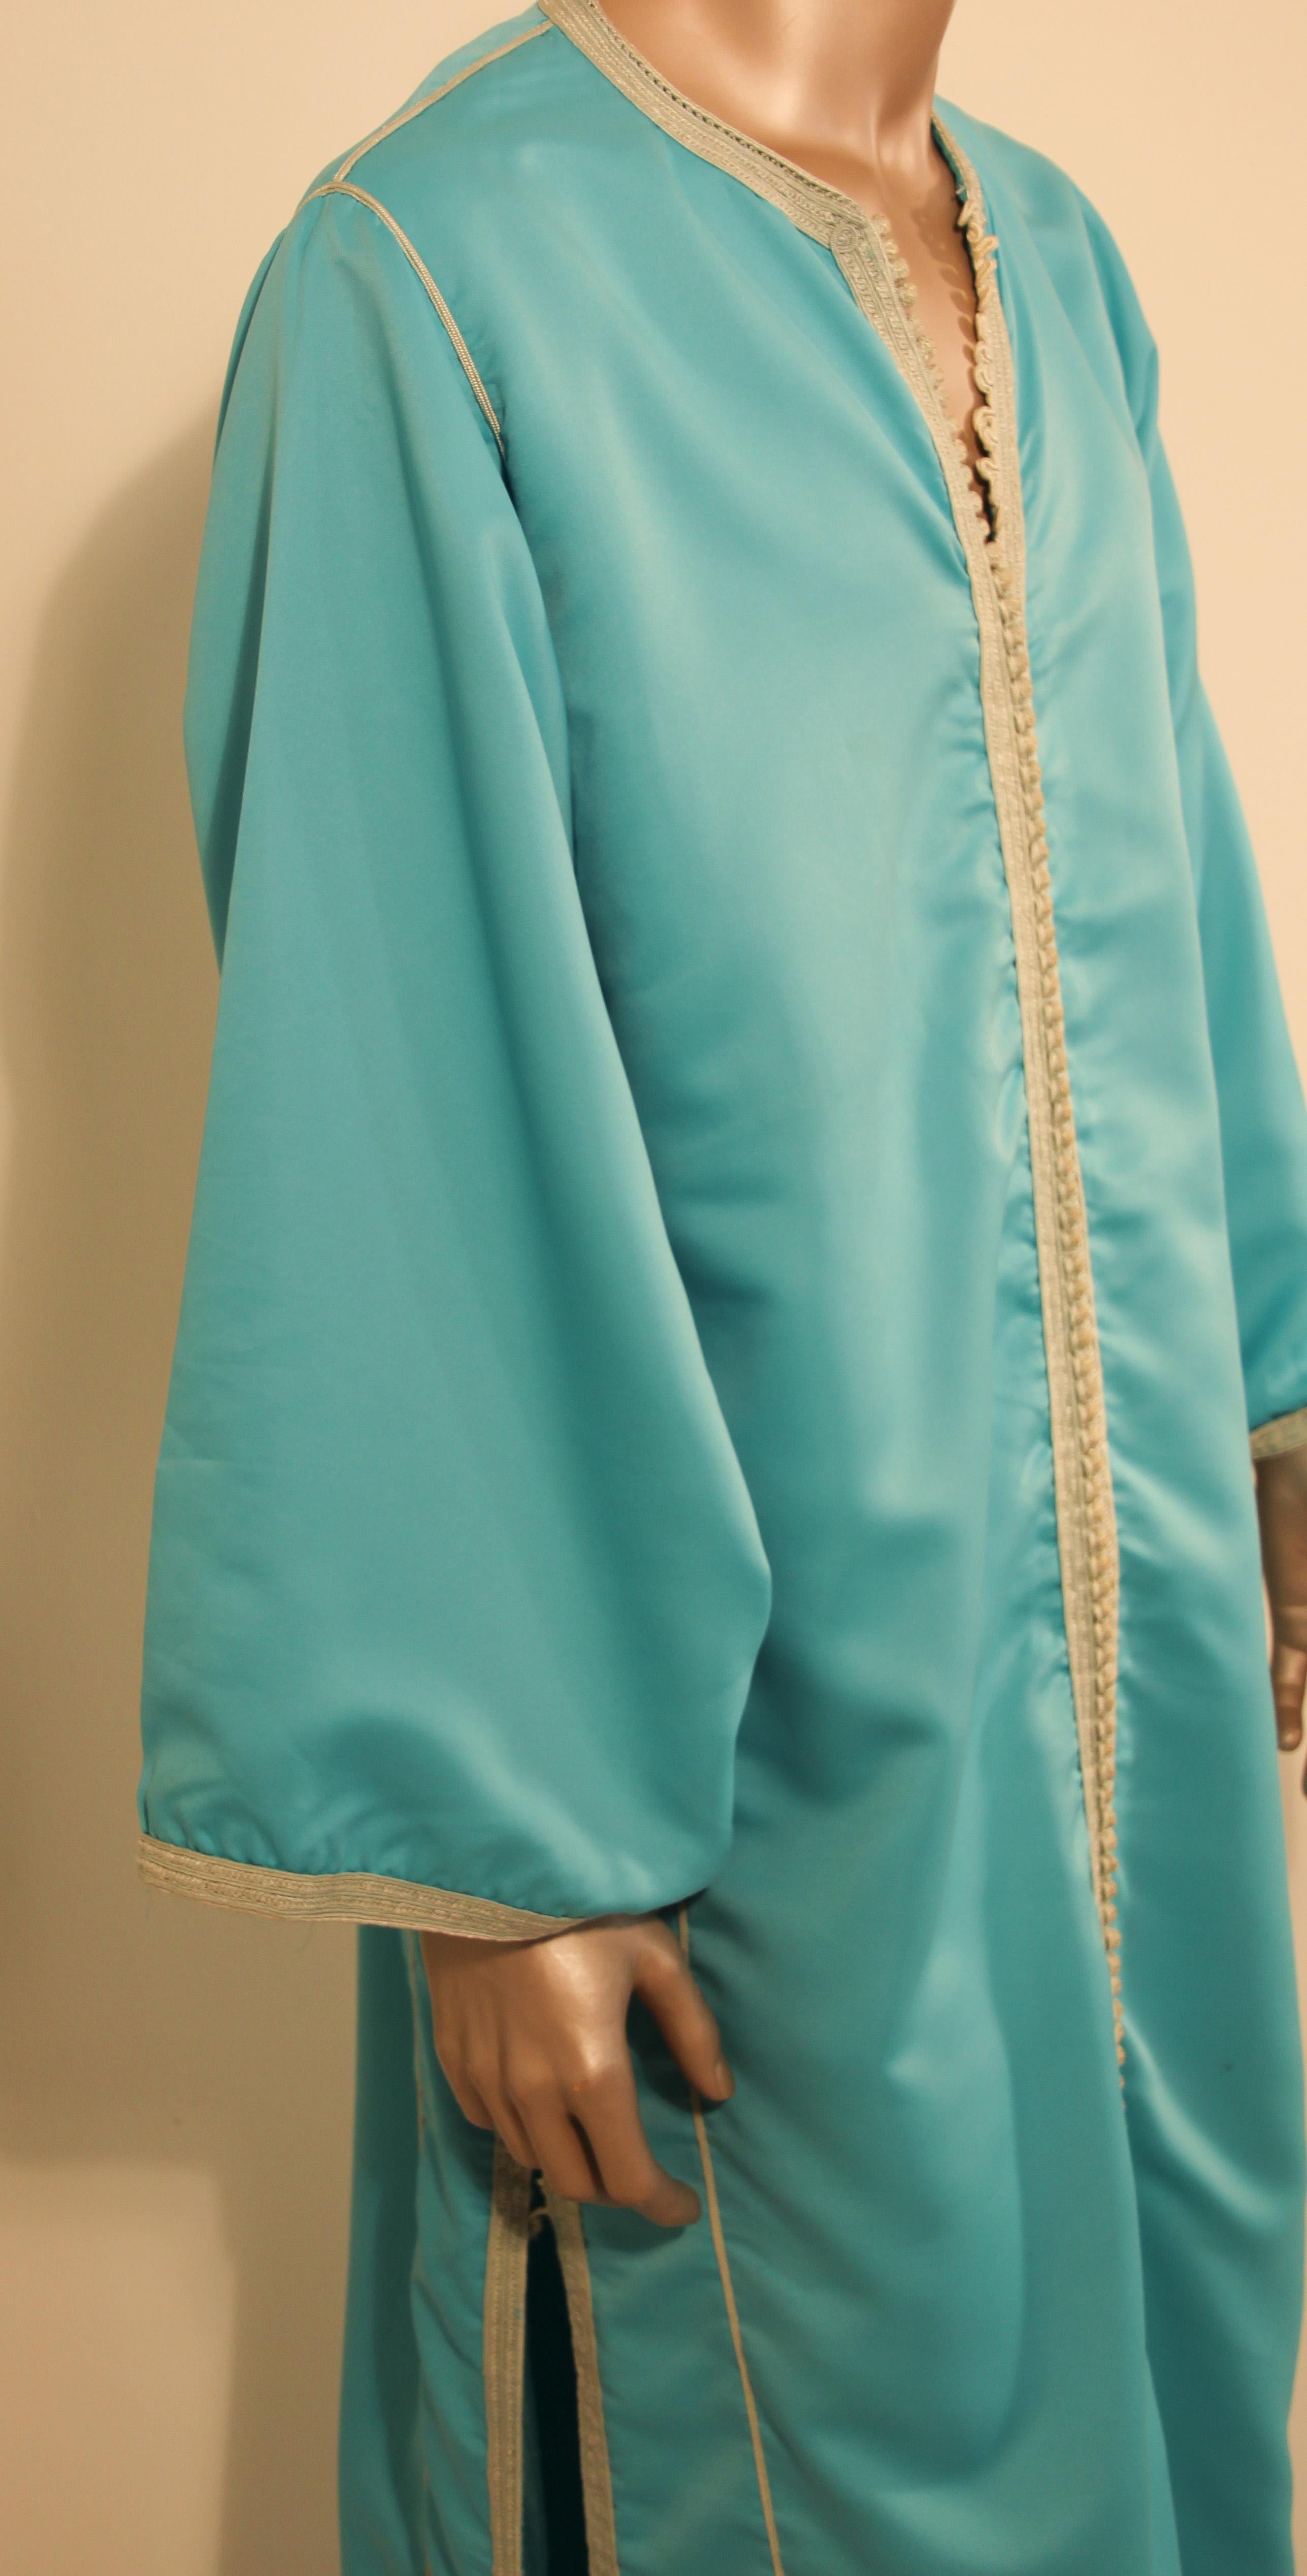 Hand-Knotted Moorish Turquoise Caftan 1970s Robe For Sale